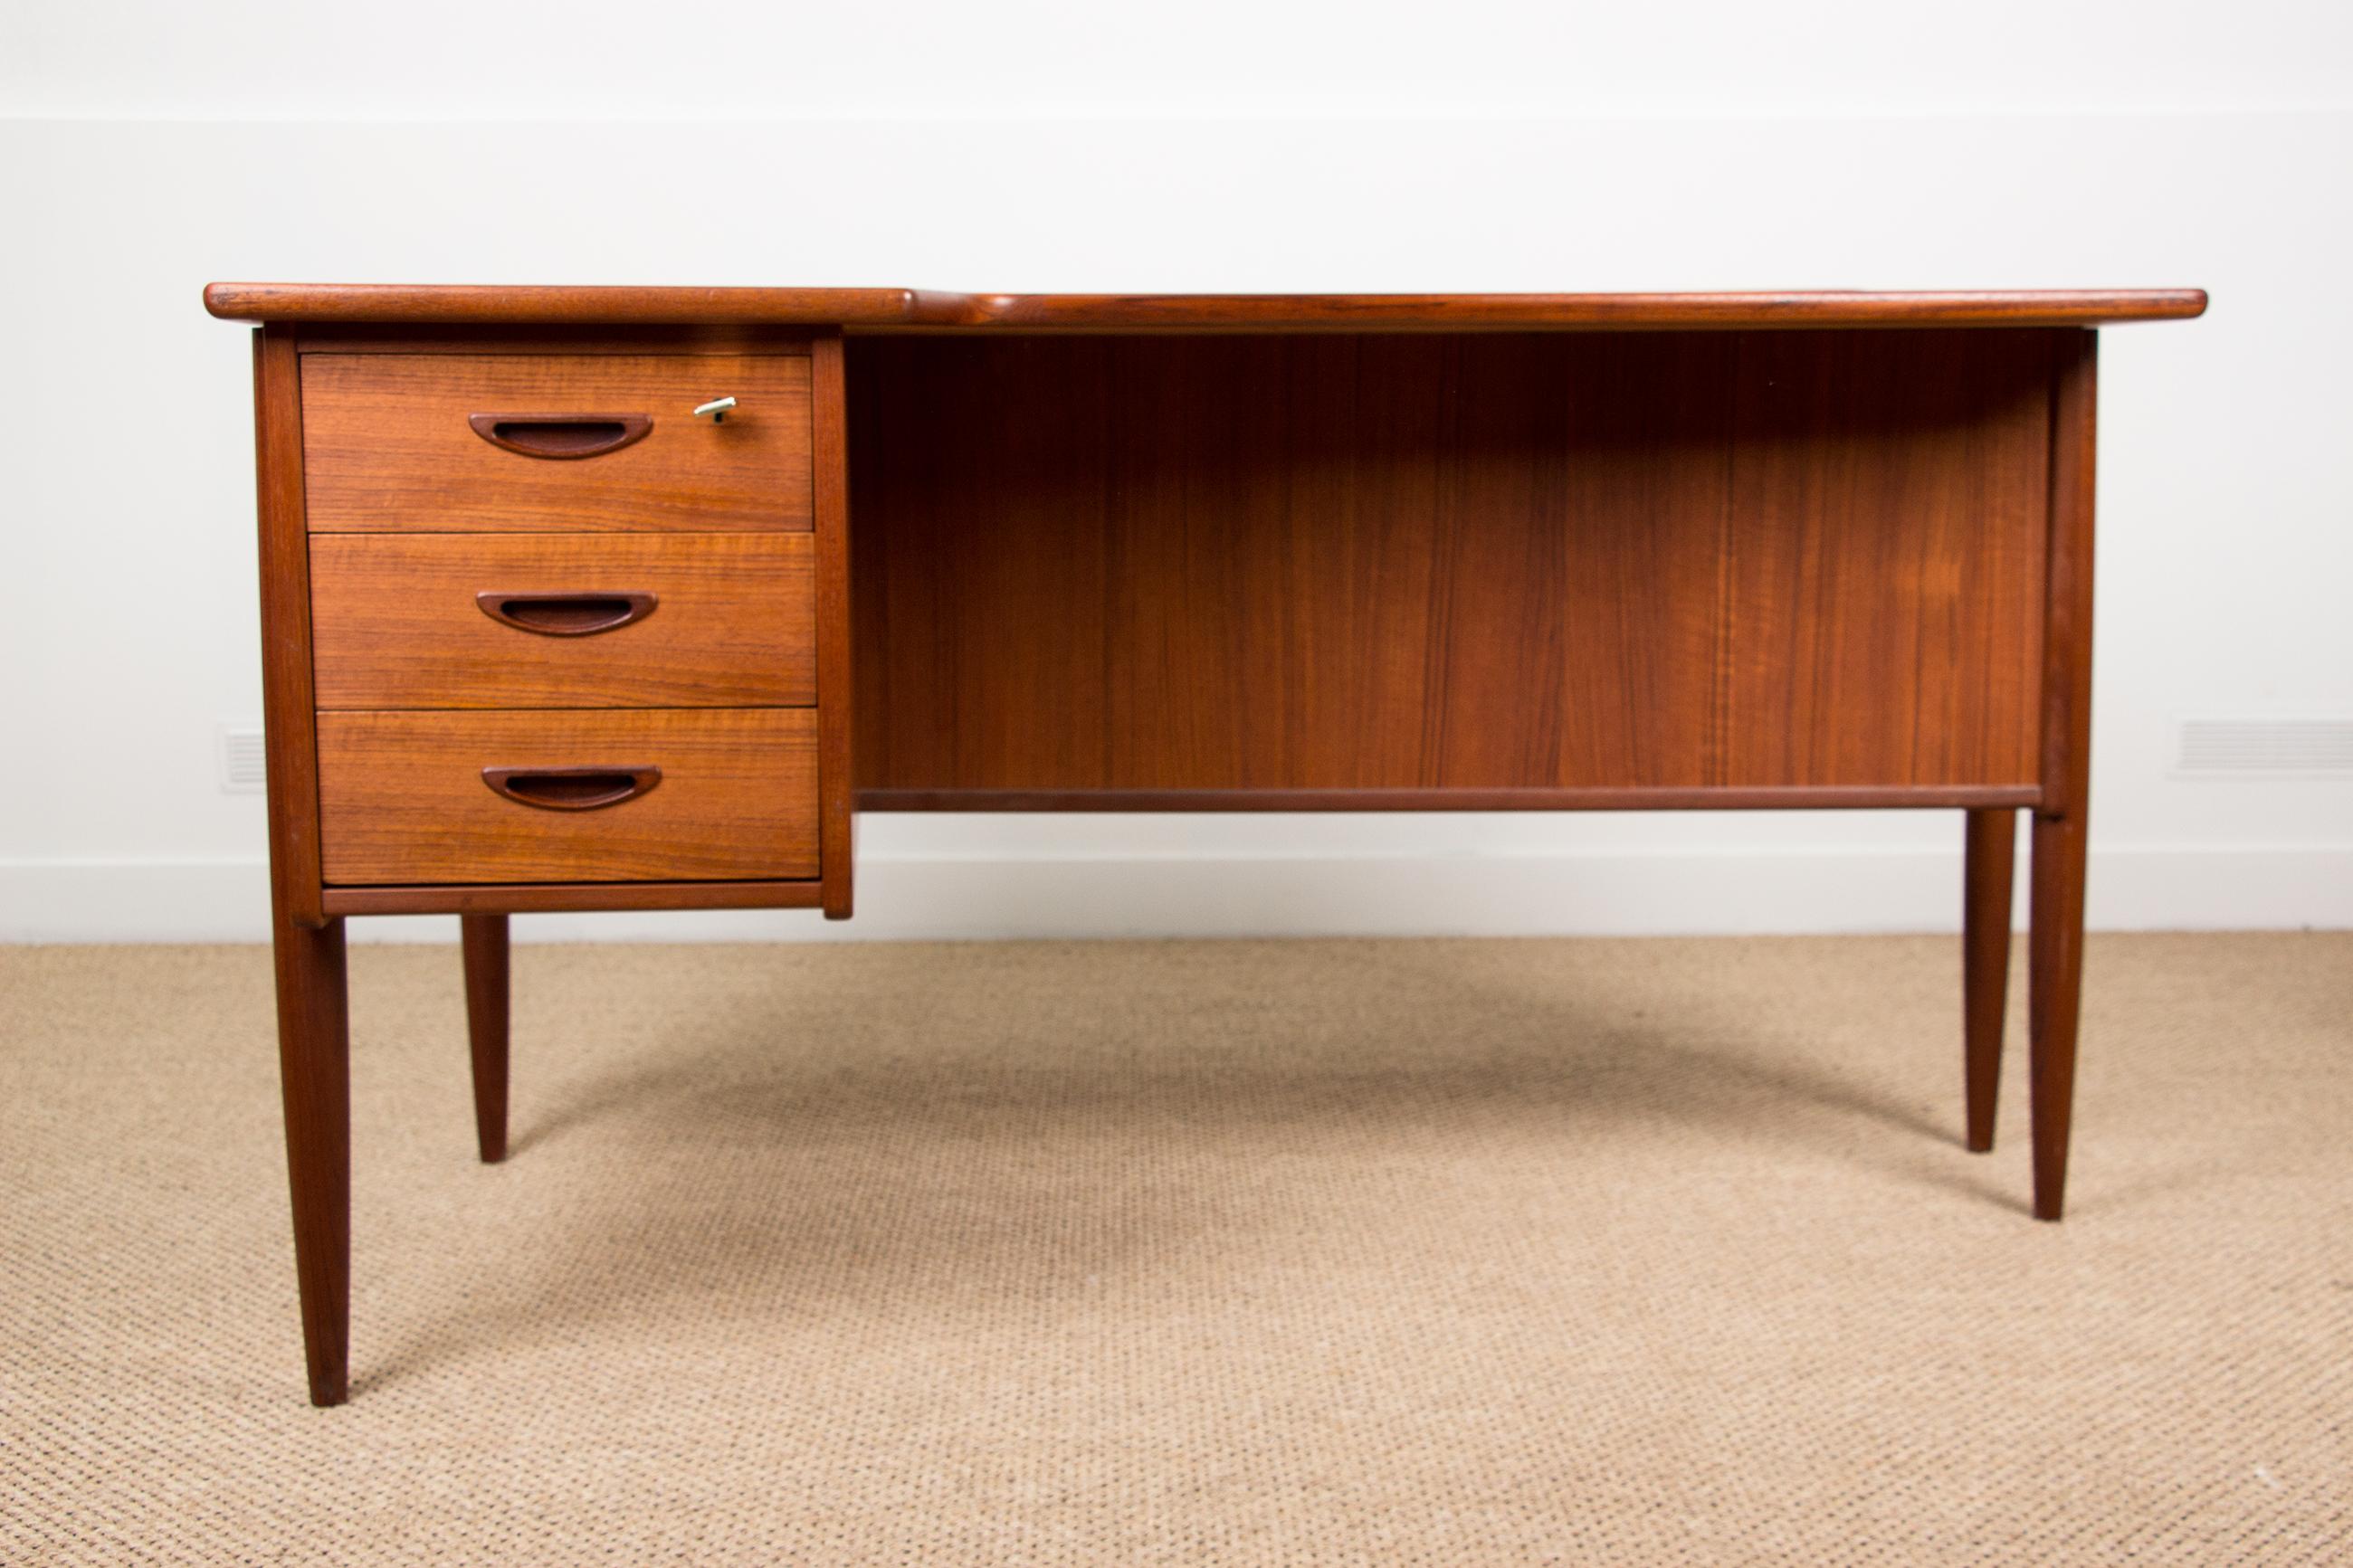 Superb Scandinavian desk in the shape of a boomerang, front side with 3 drawers, back side with a bar door and an interior shelf on the left and a storage niche on the left. Two keys provided.